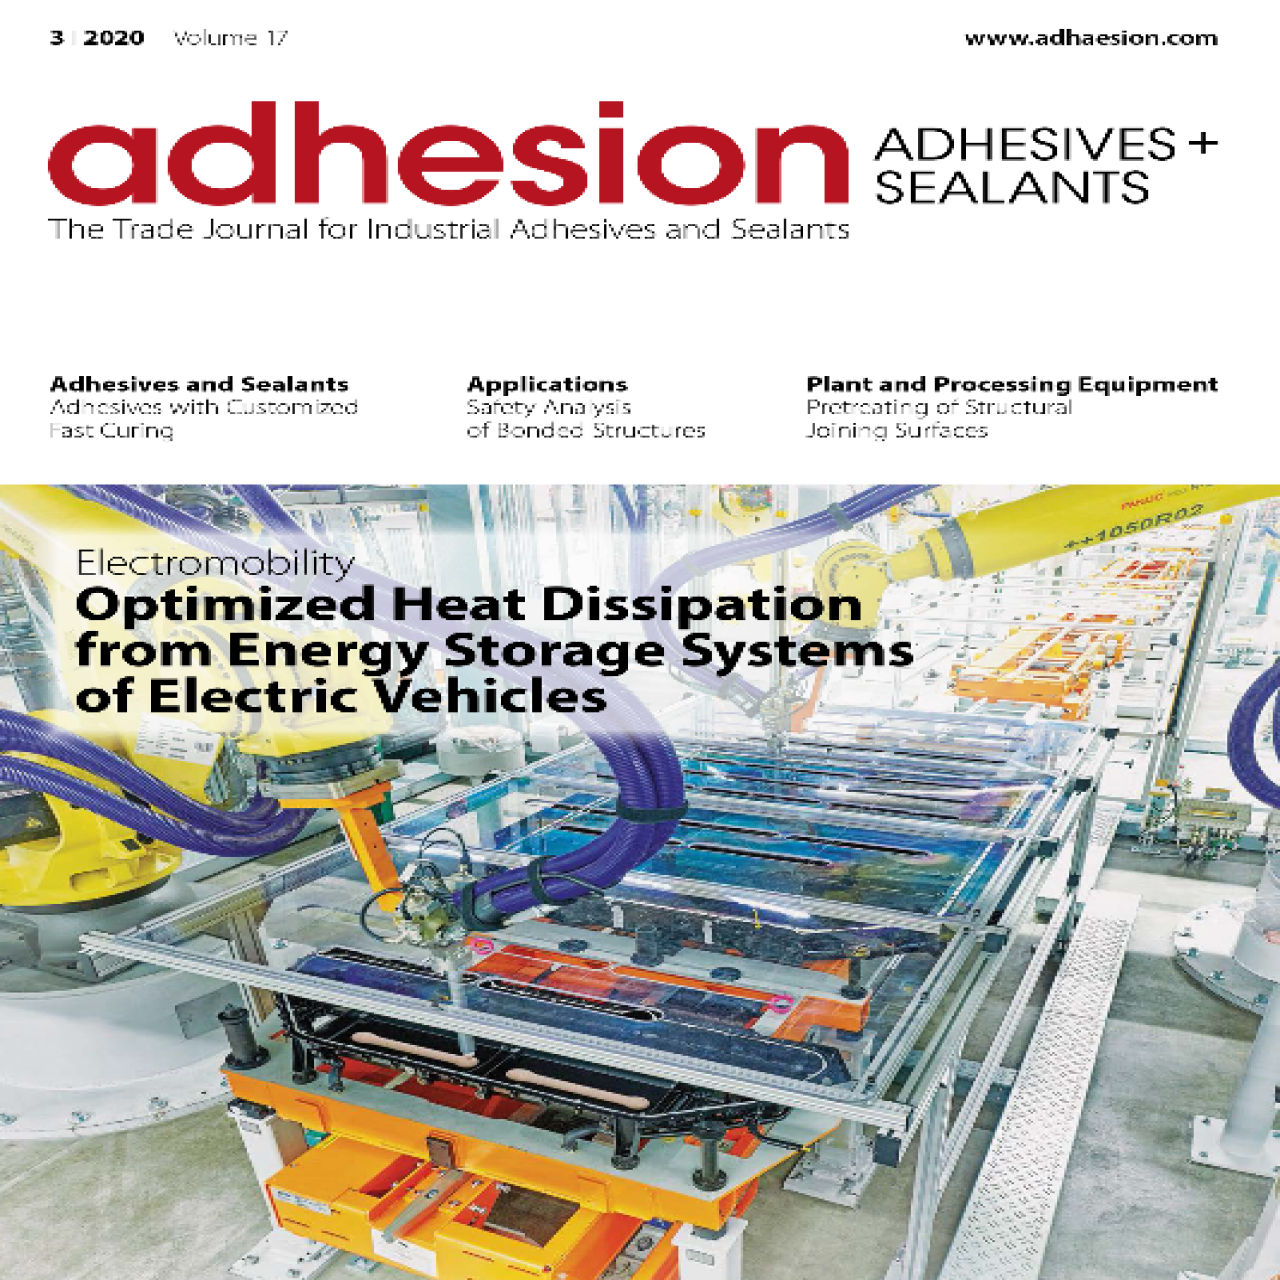 adhesion ADHESIVES + SEALANTS - Structural Adhesives with Customized Fast Curing